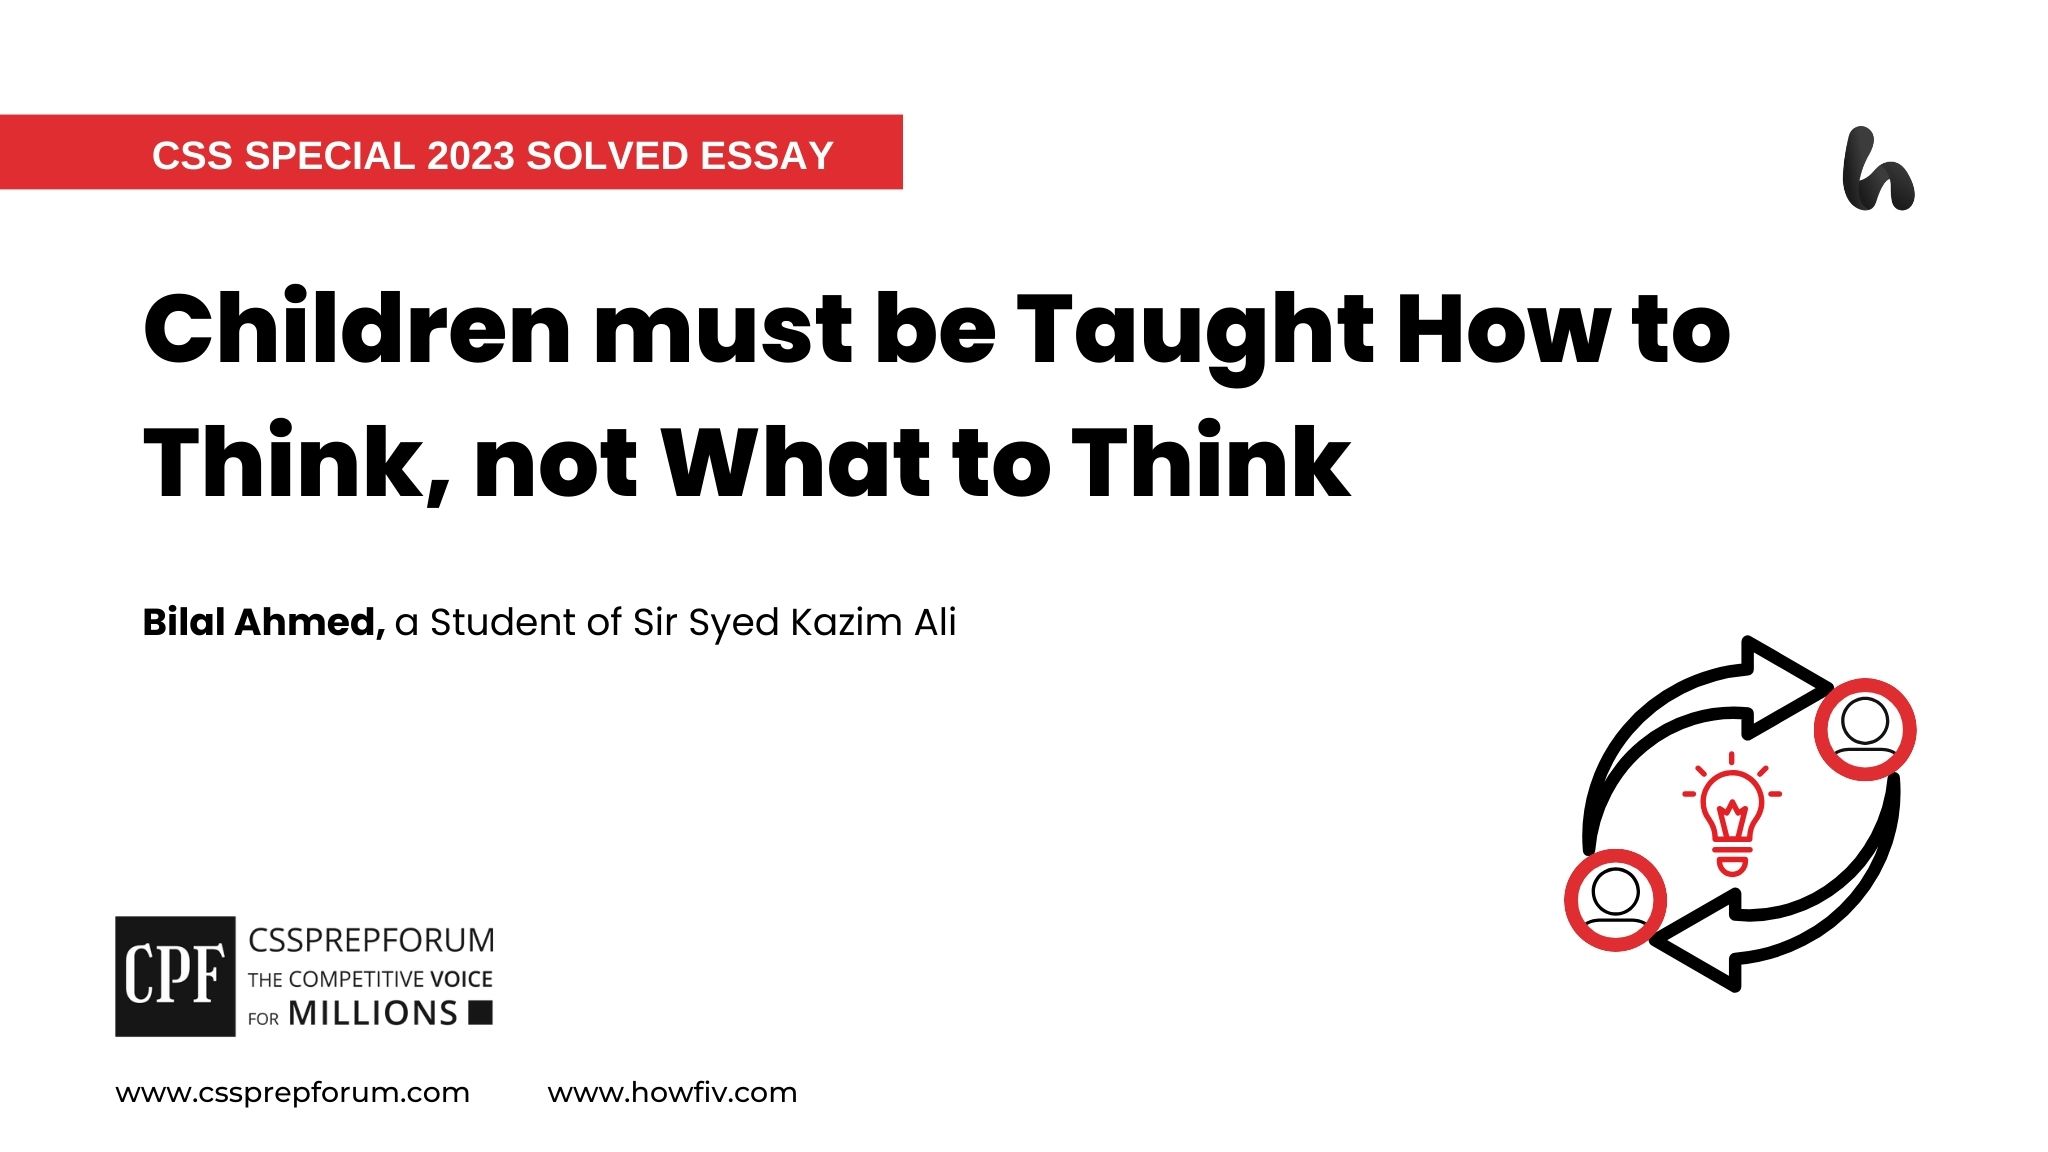 Children Must be Taught How to Think, not What to Think